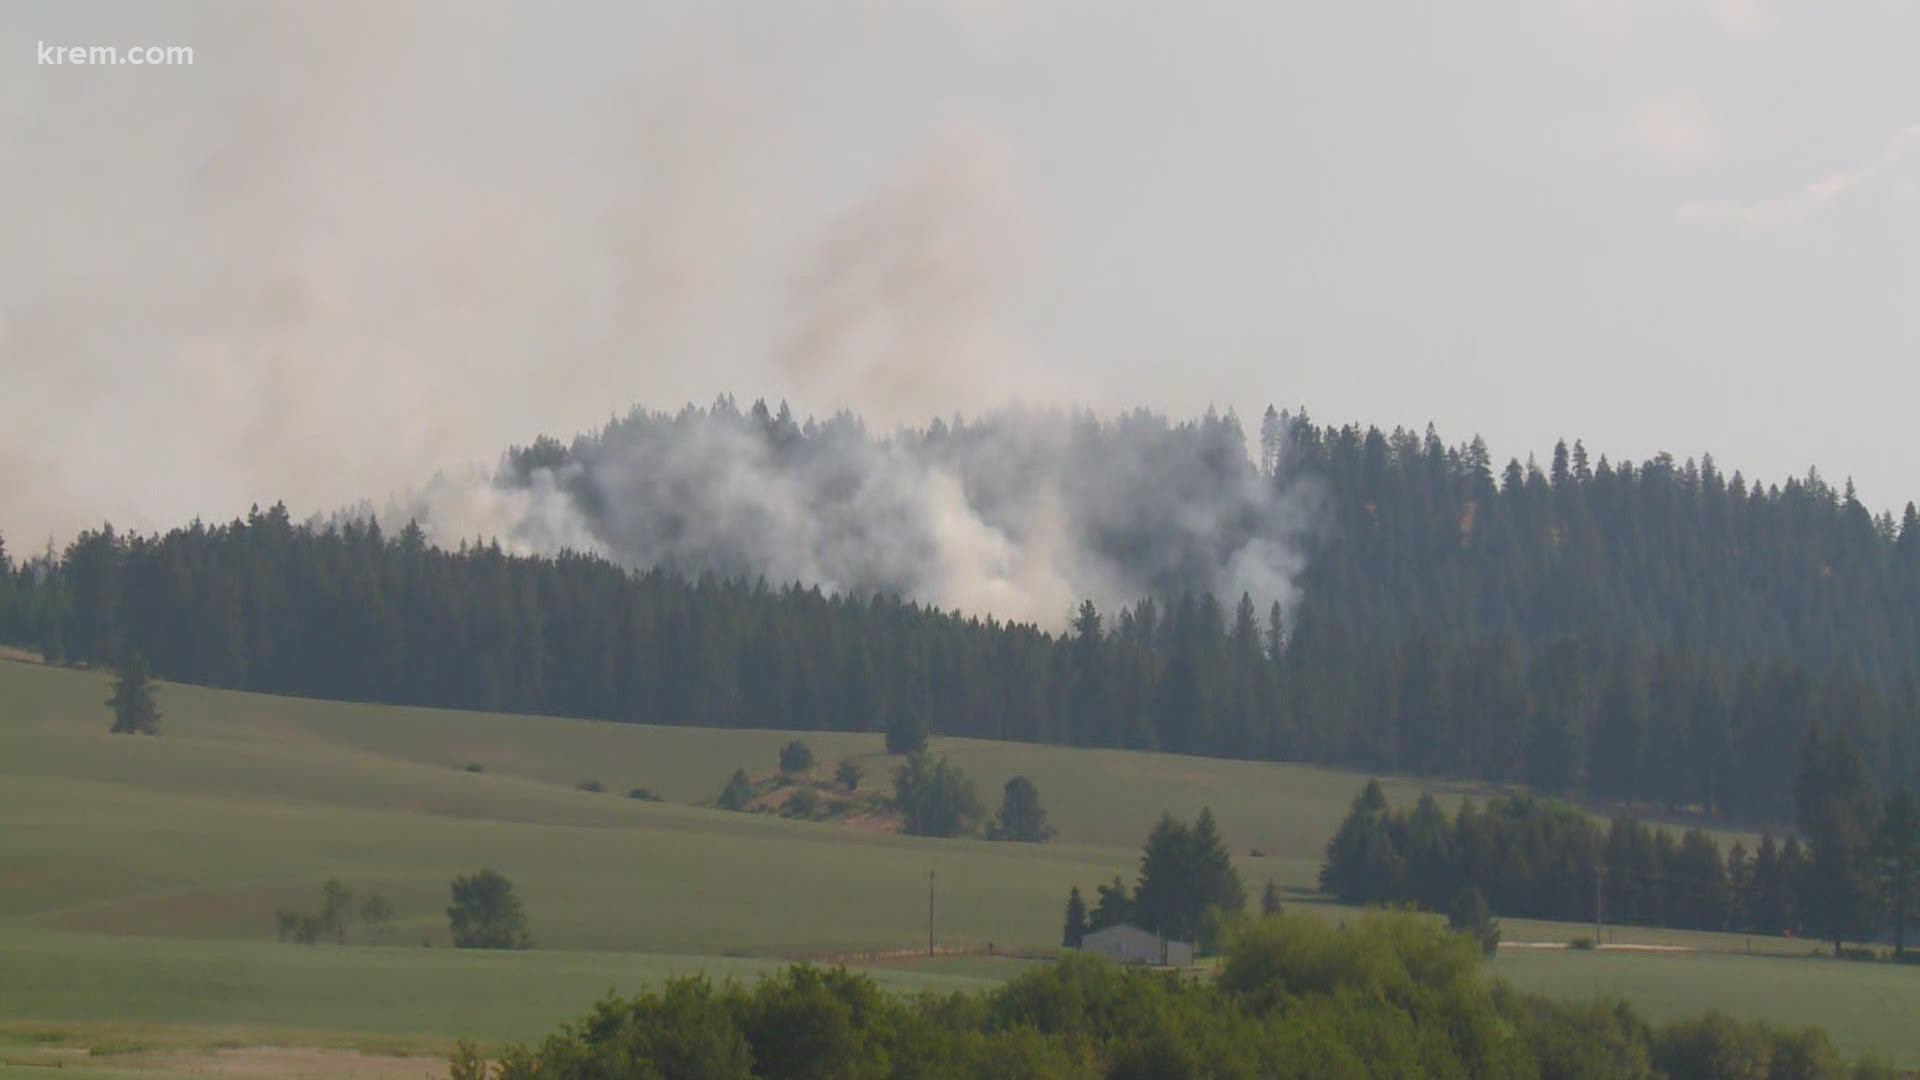 As of Thursday morning, the fire is reported to be about 10 acres in size.